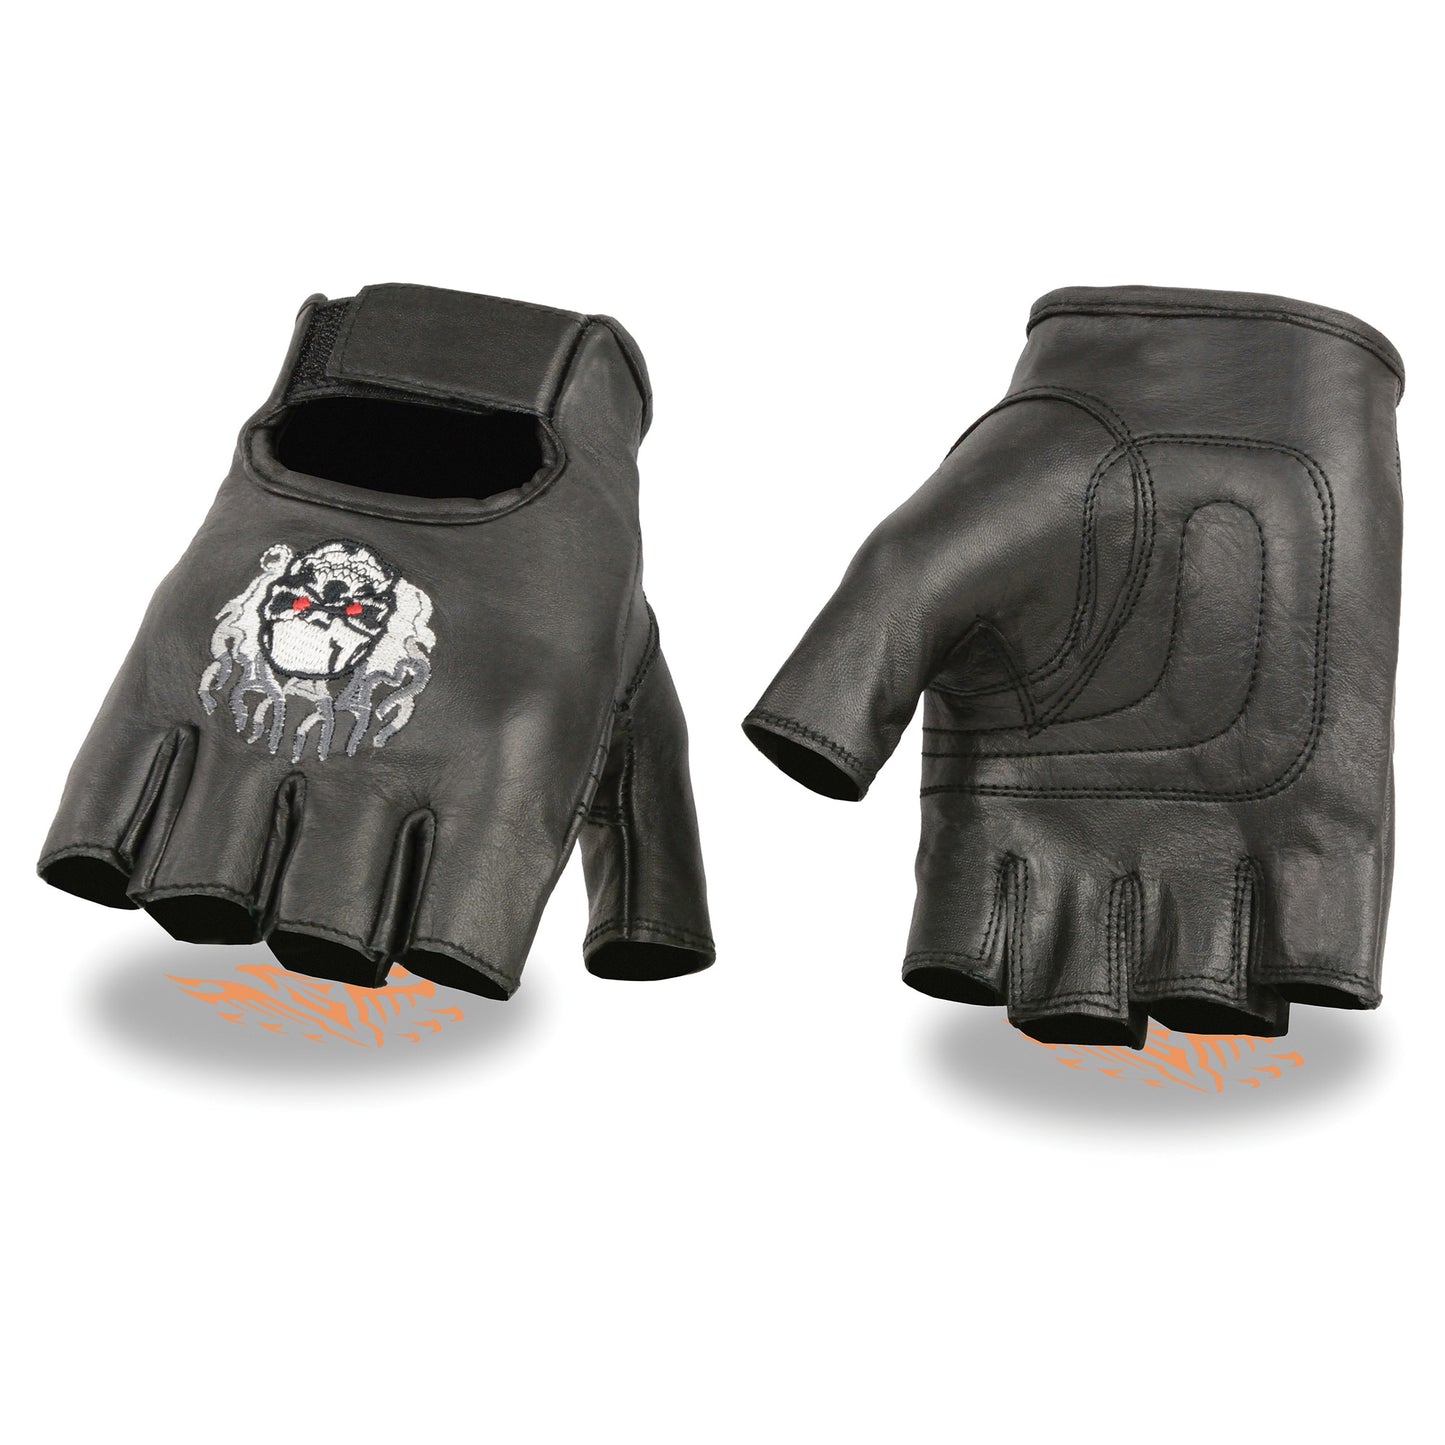 Men’s Leather Fingerless Glove w/ Flaming Skull Embroidery